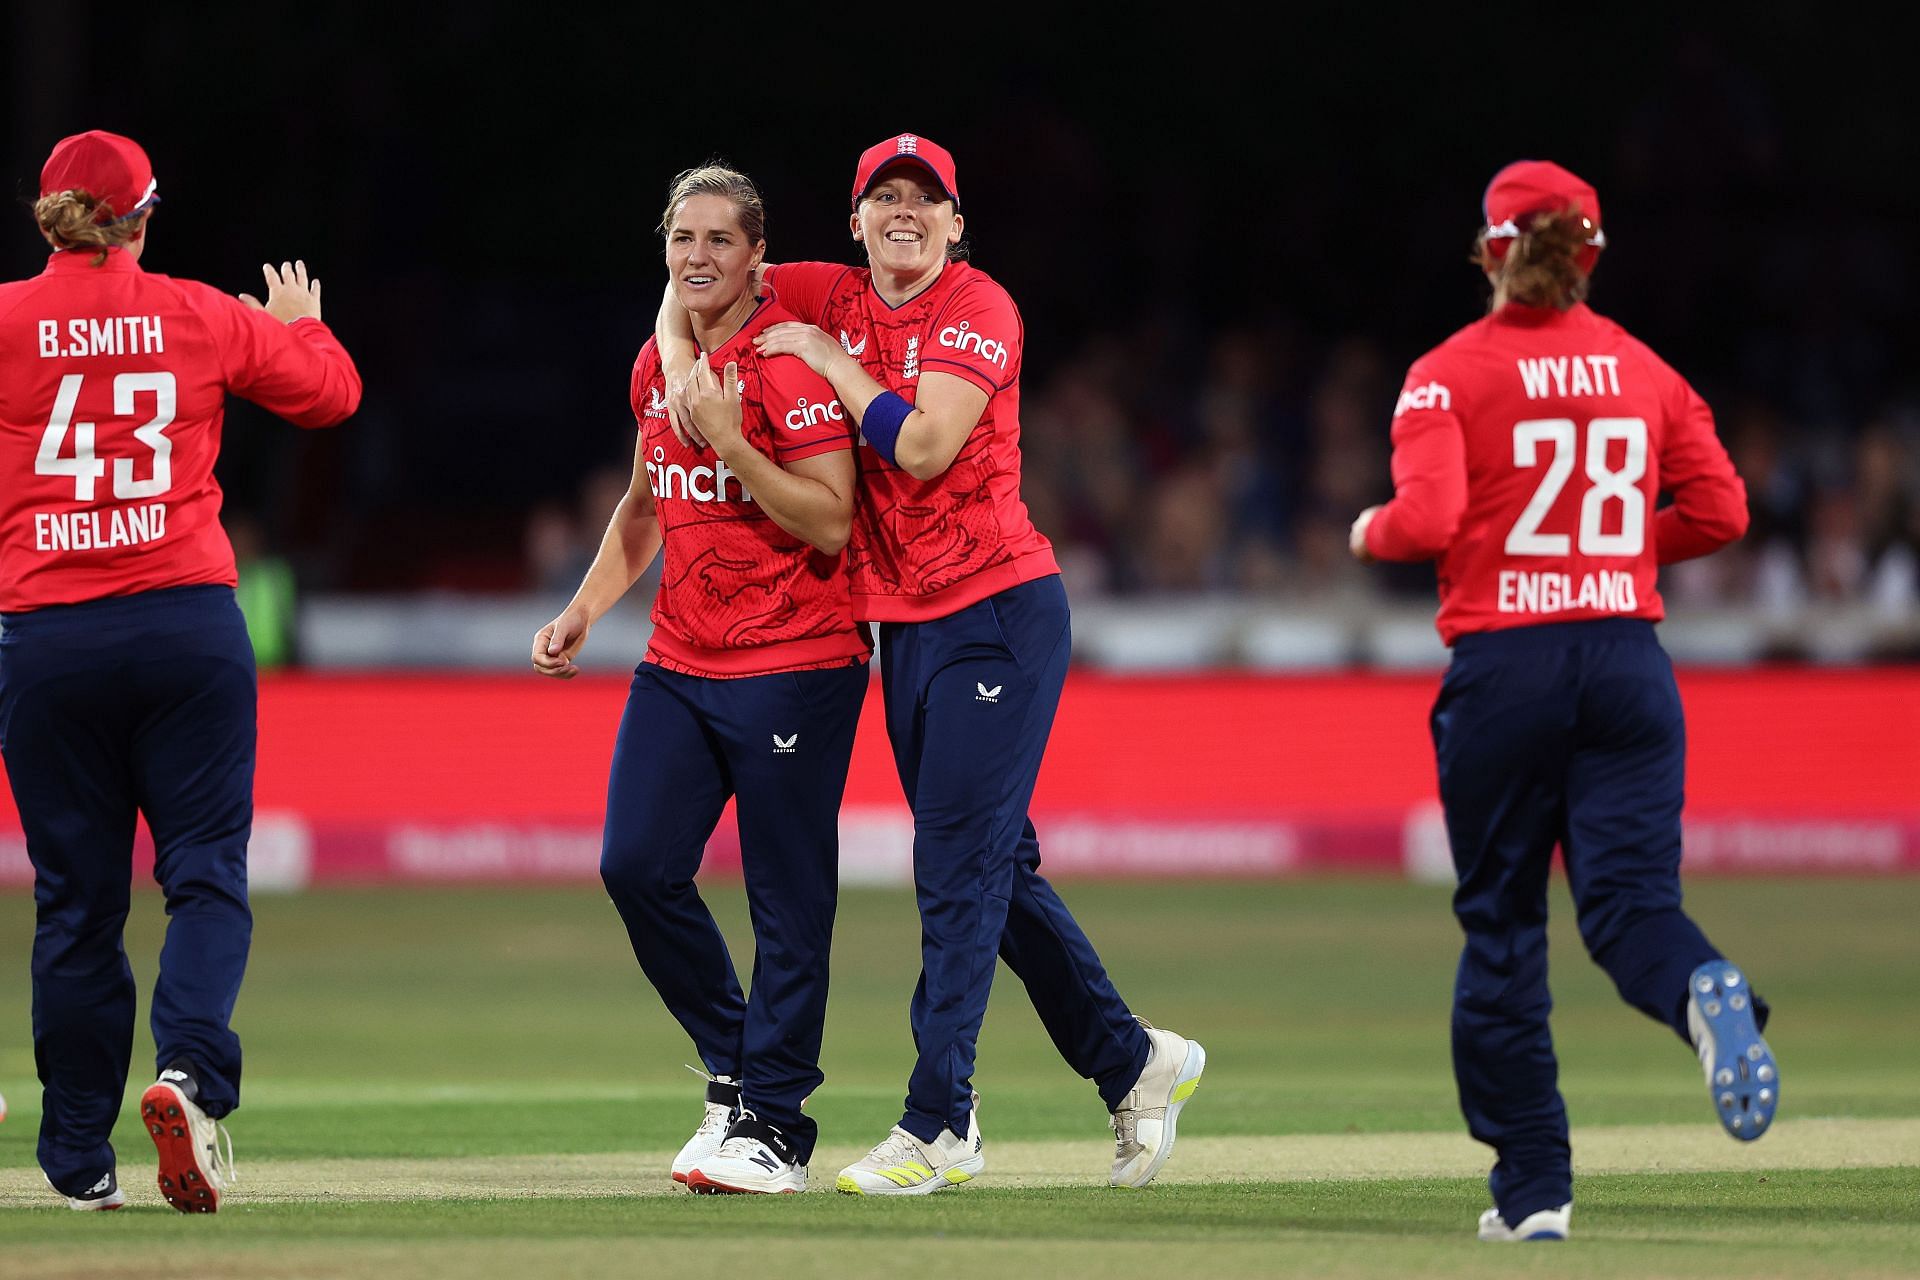 England Women v South Africa Women - 1st Vitality IT20 (Image Courtesy: Getty Images)